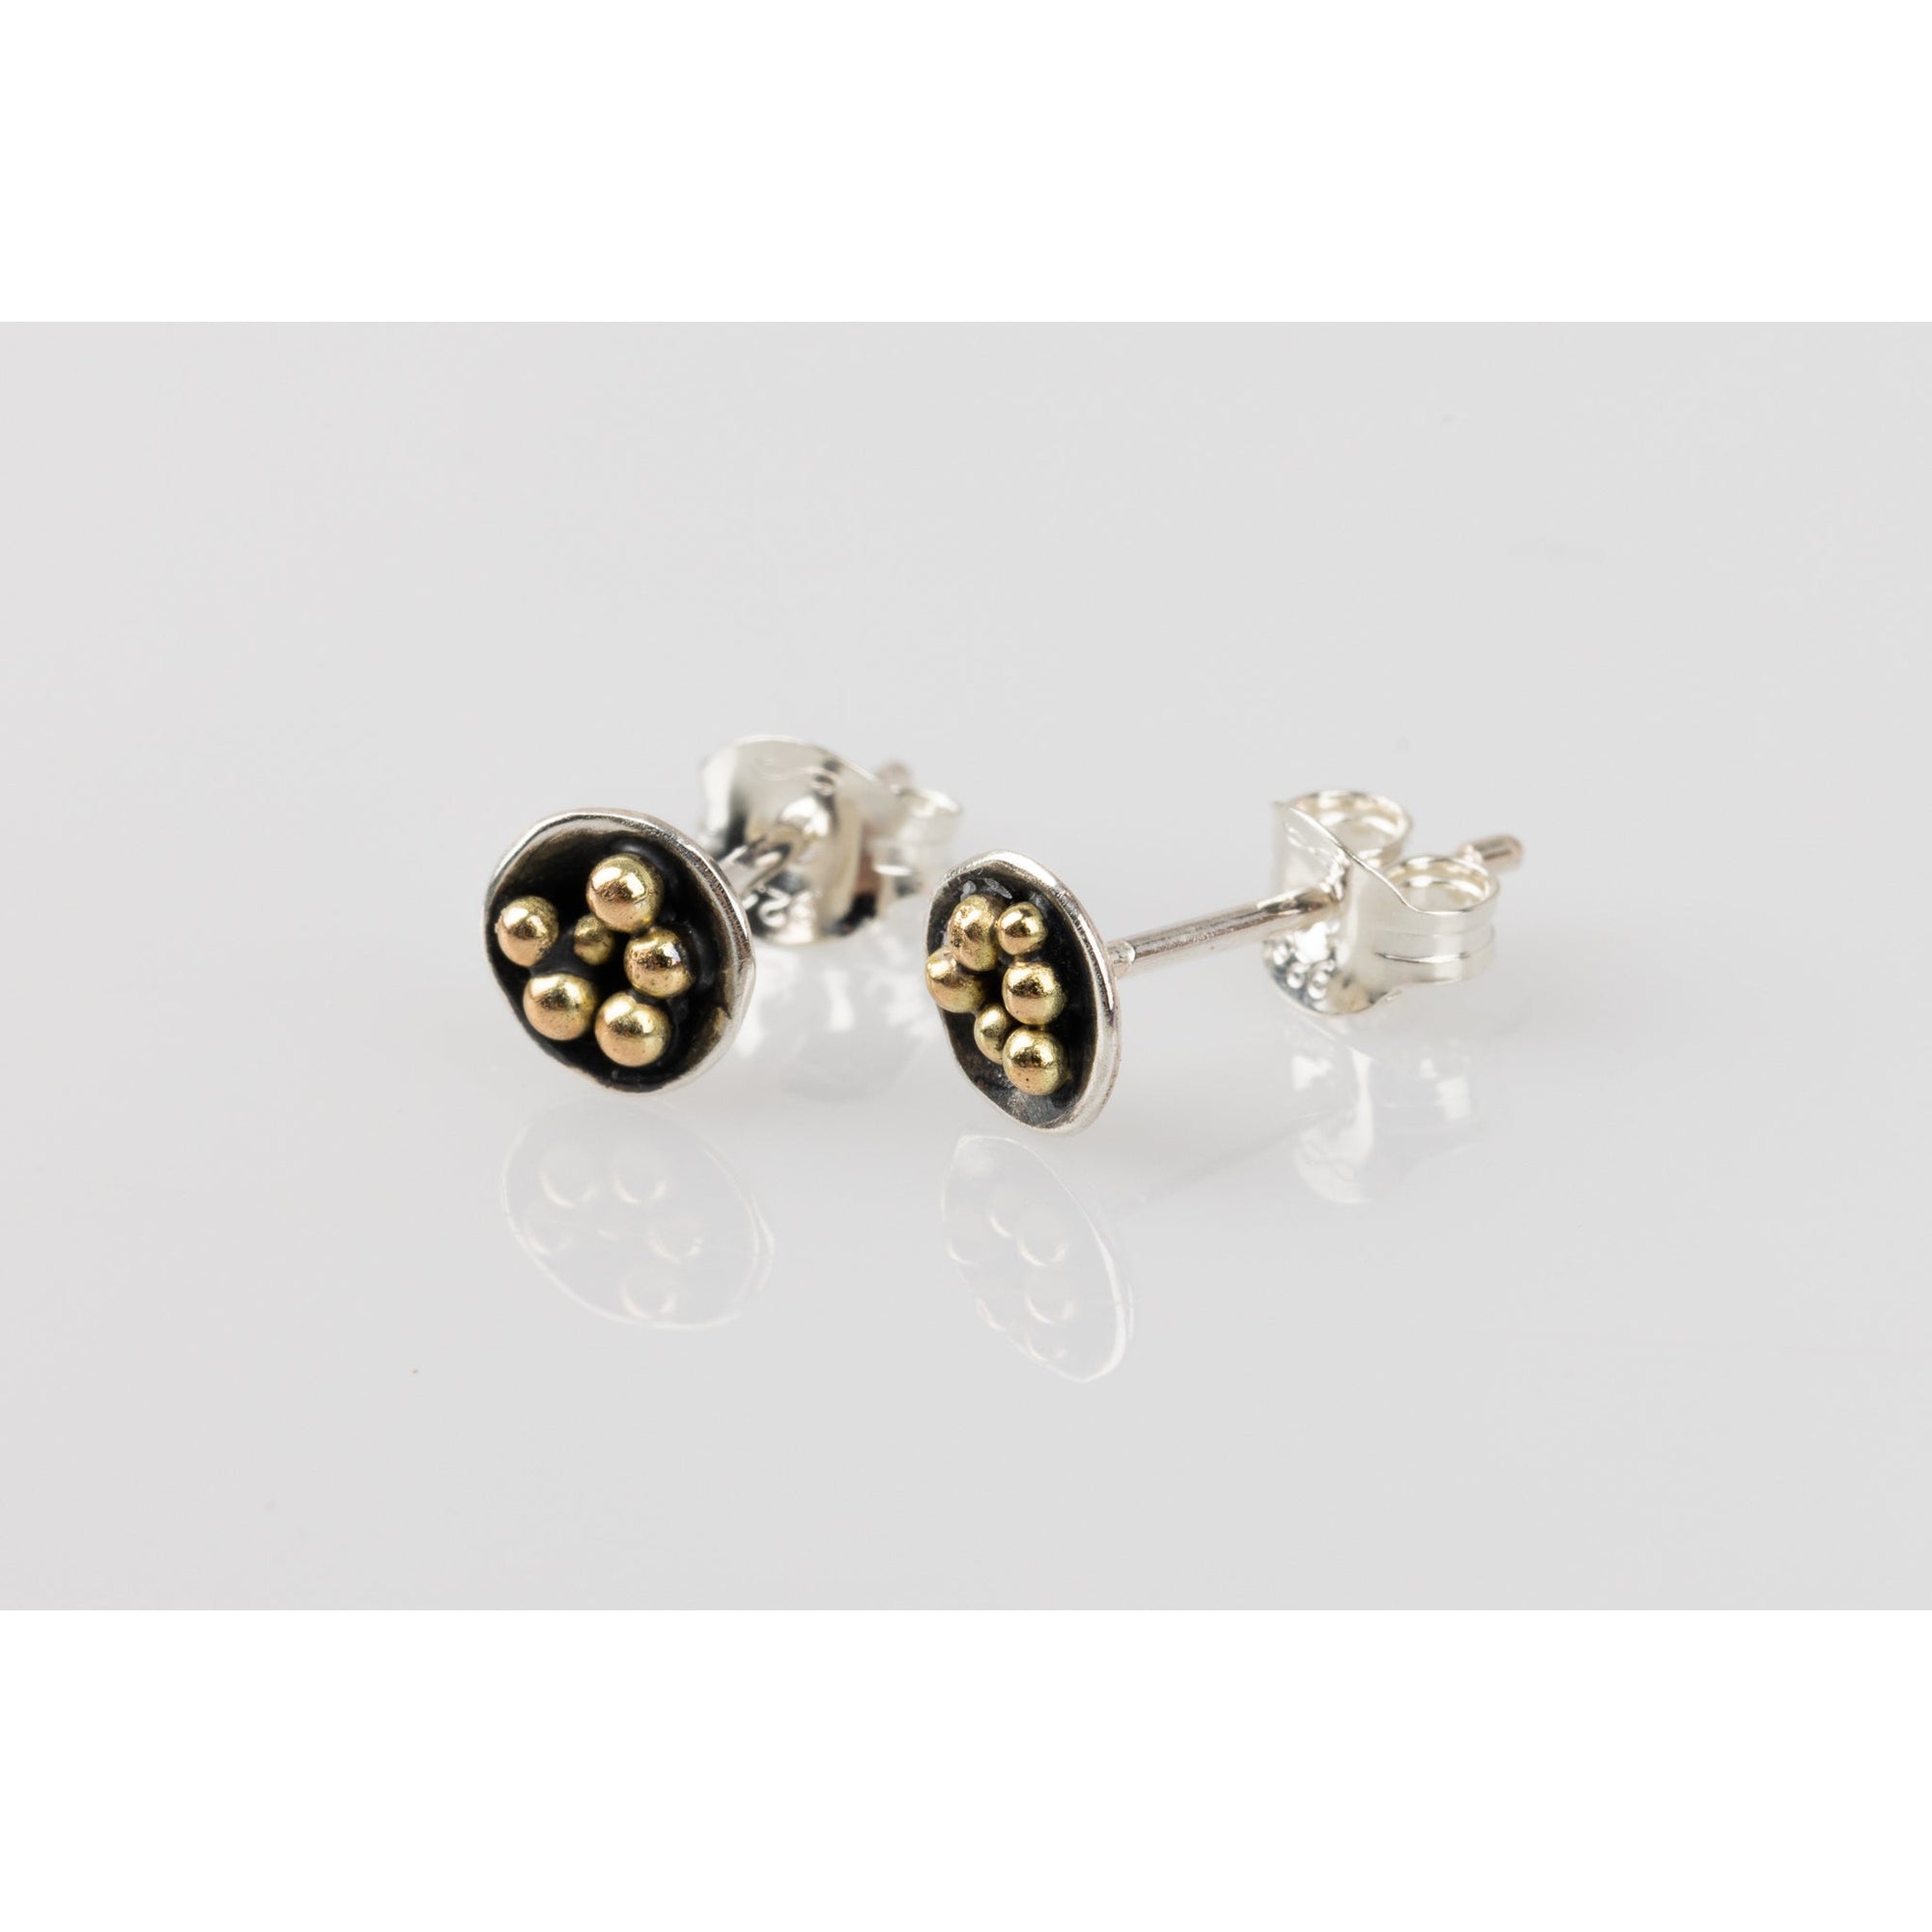 'SA Ea48 Silver oxidised studs' by Sandra Austin jewellery, available at Padstow Gallery, Cornwall